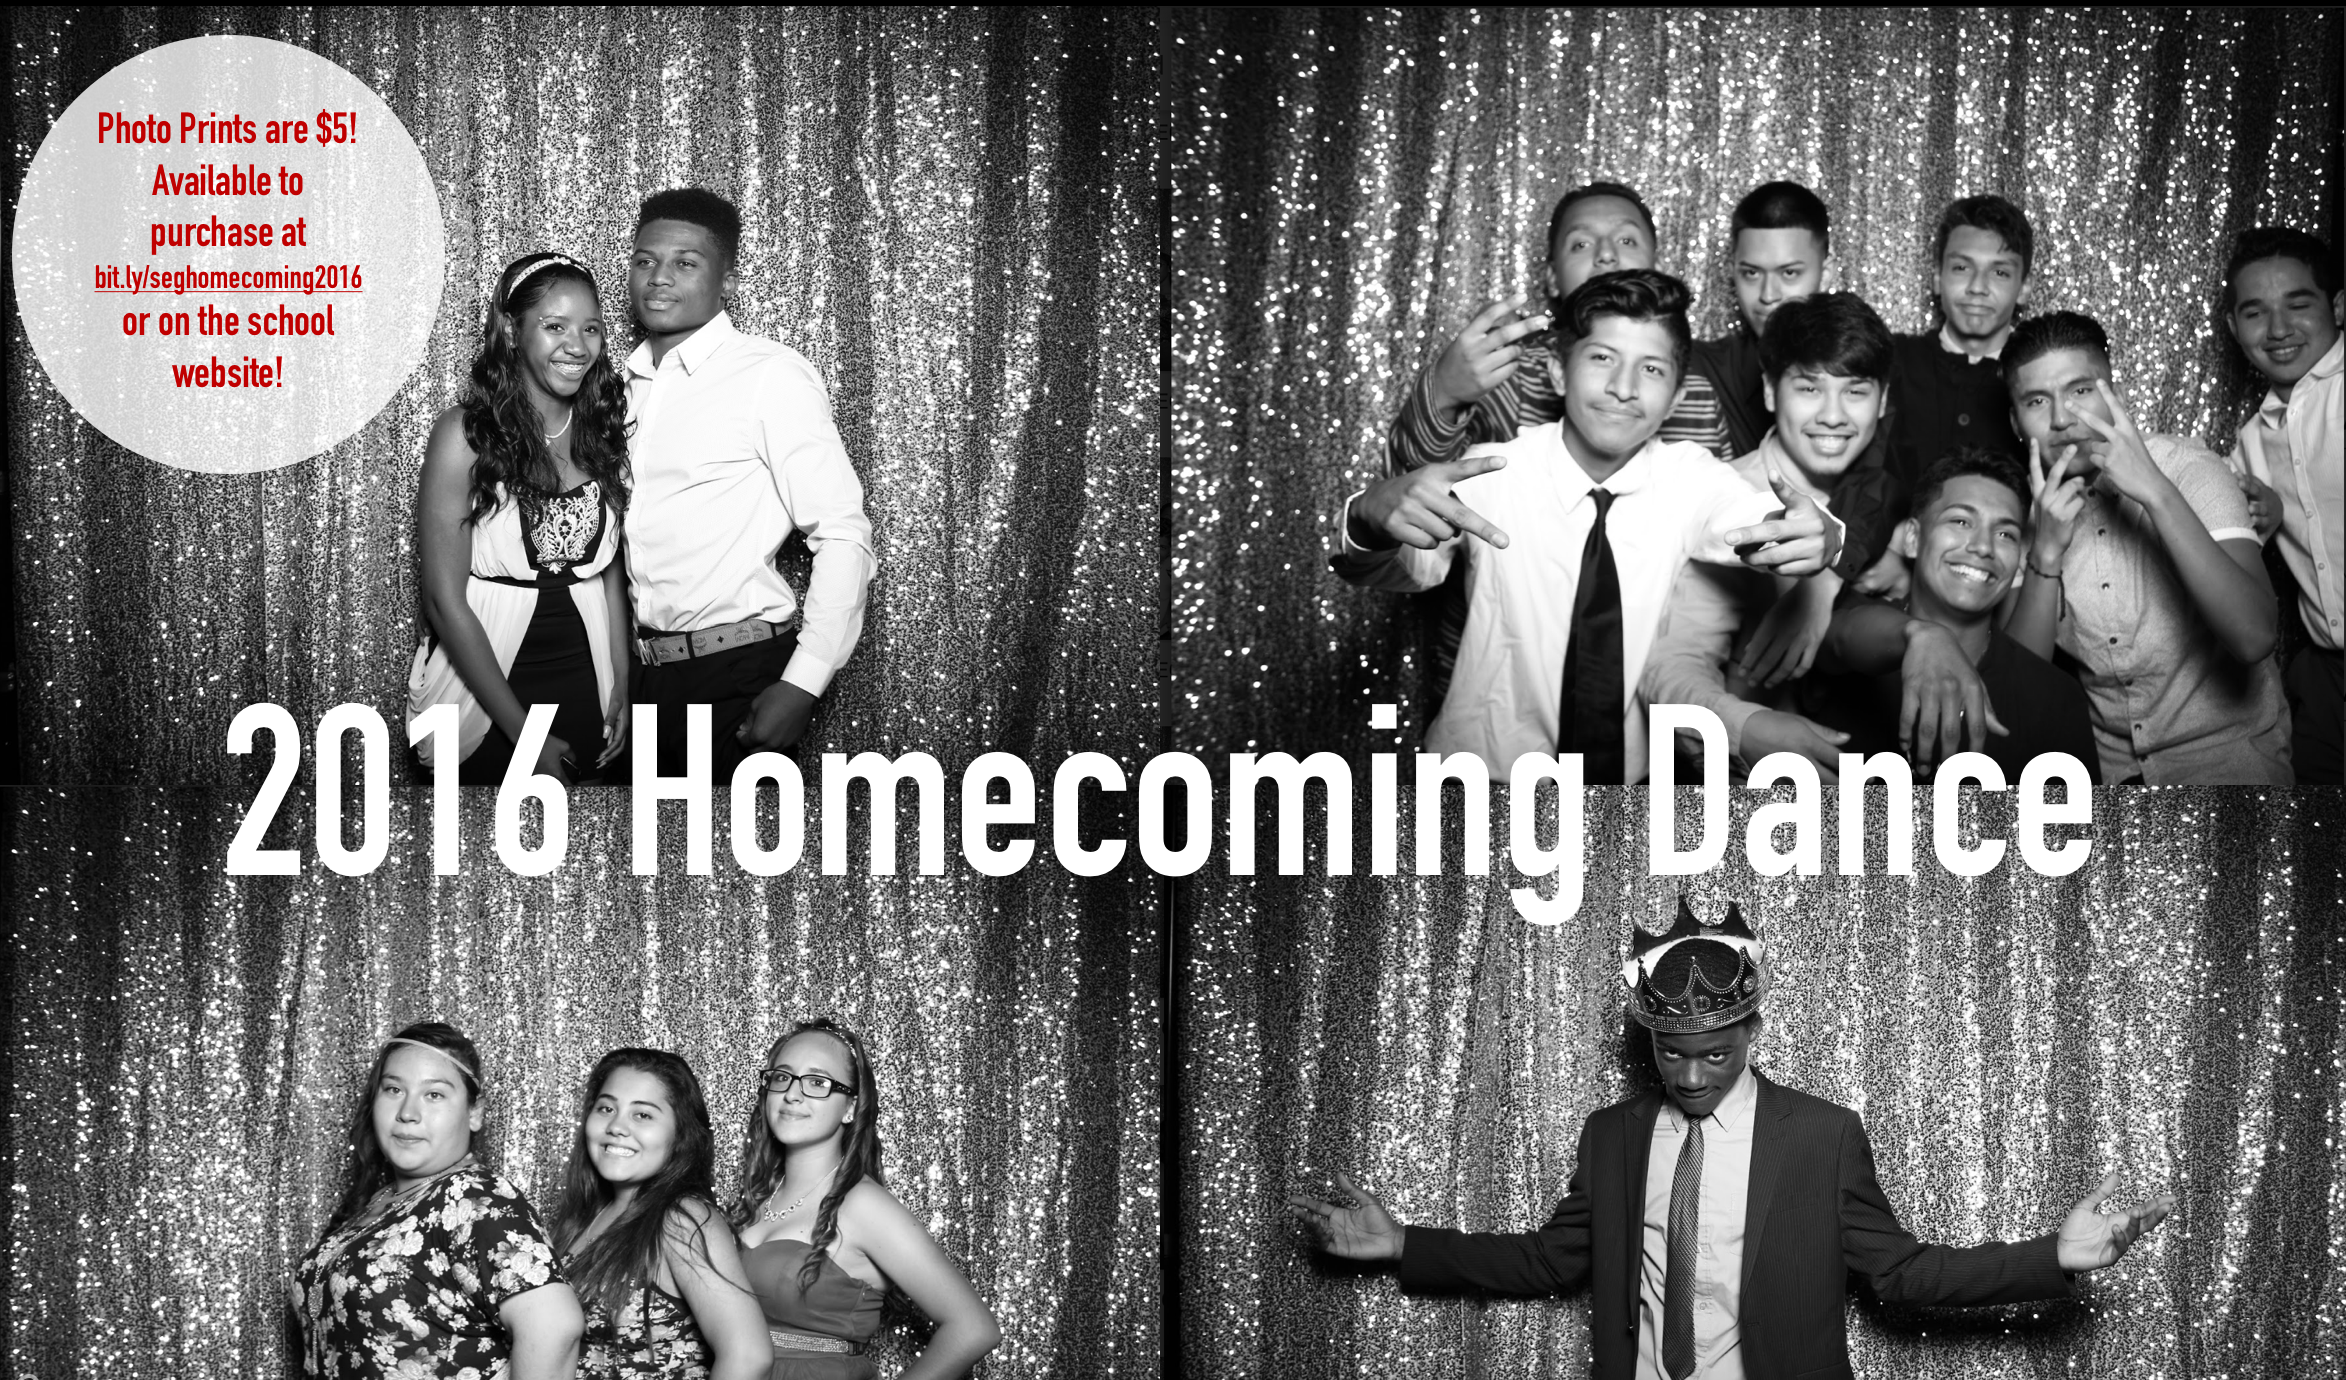 2016 Homecoming Dance Photos Now Available for Purchase!